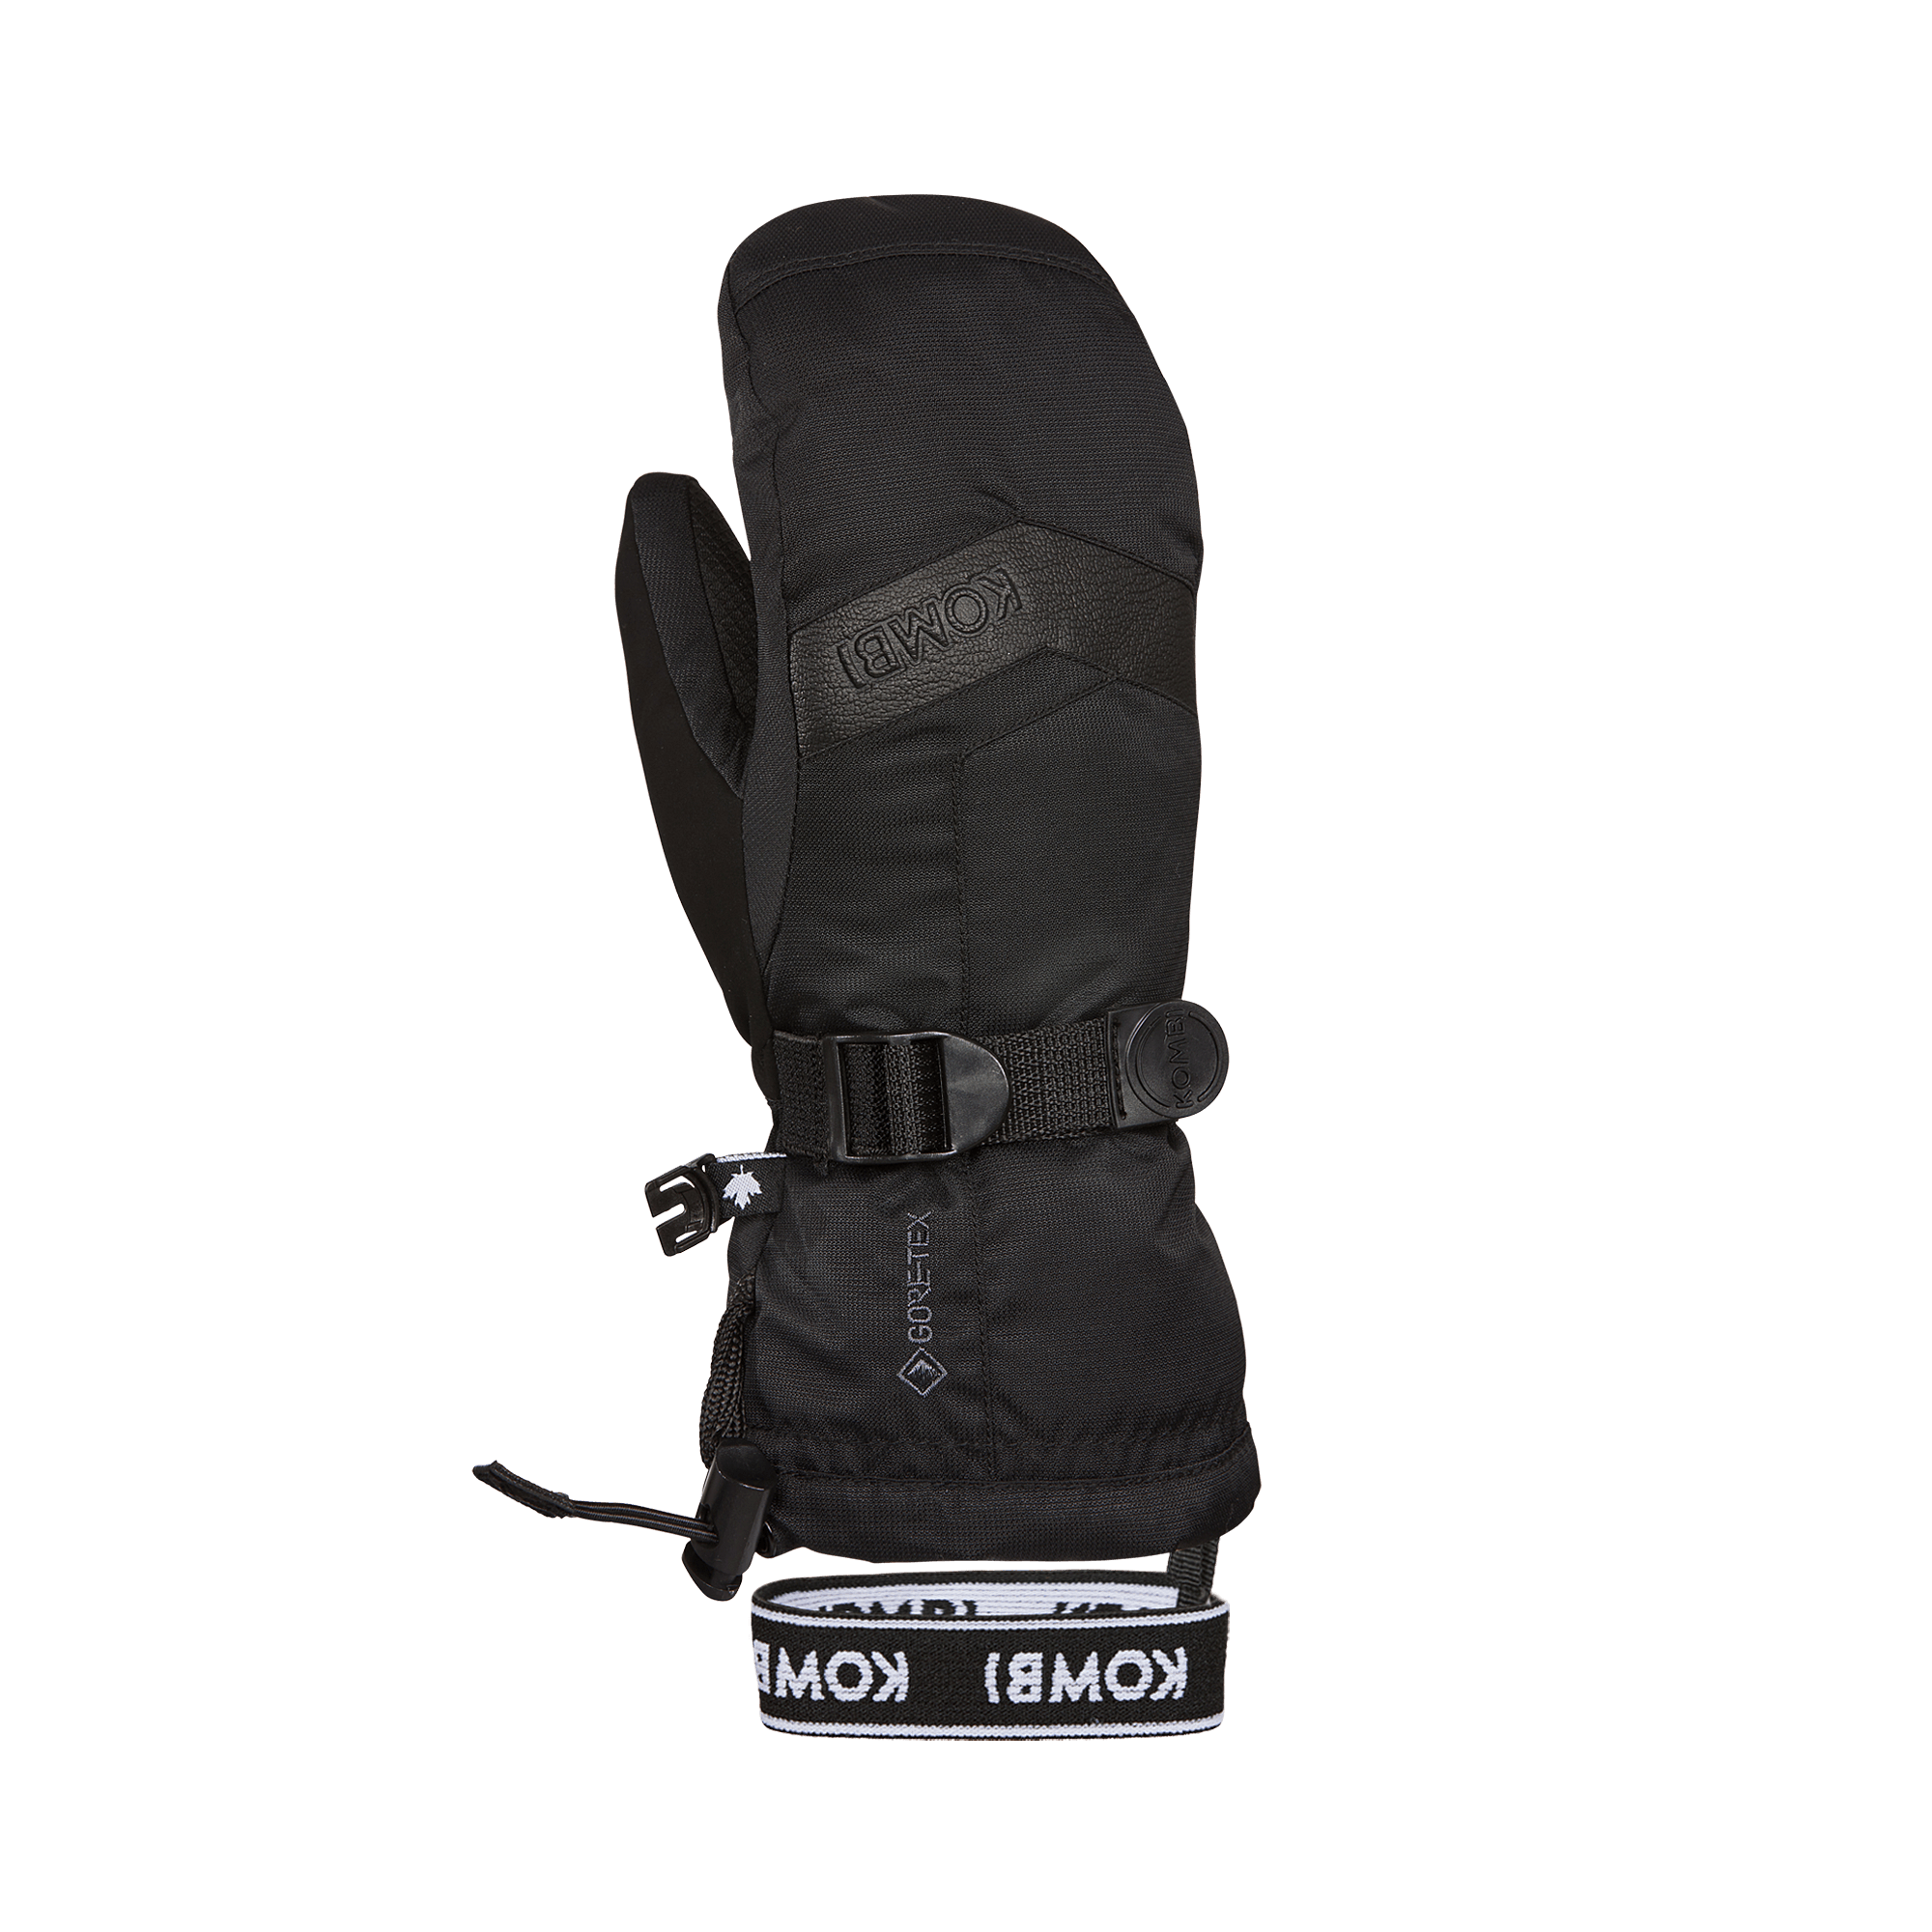 Kombi Zenith Jr Mitts - Mountain Kids Outfitters in Black - Back of the Palm View